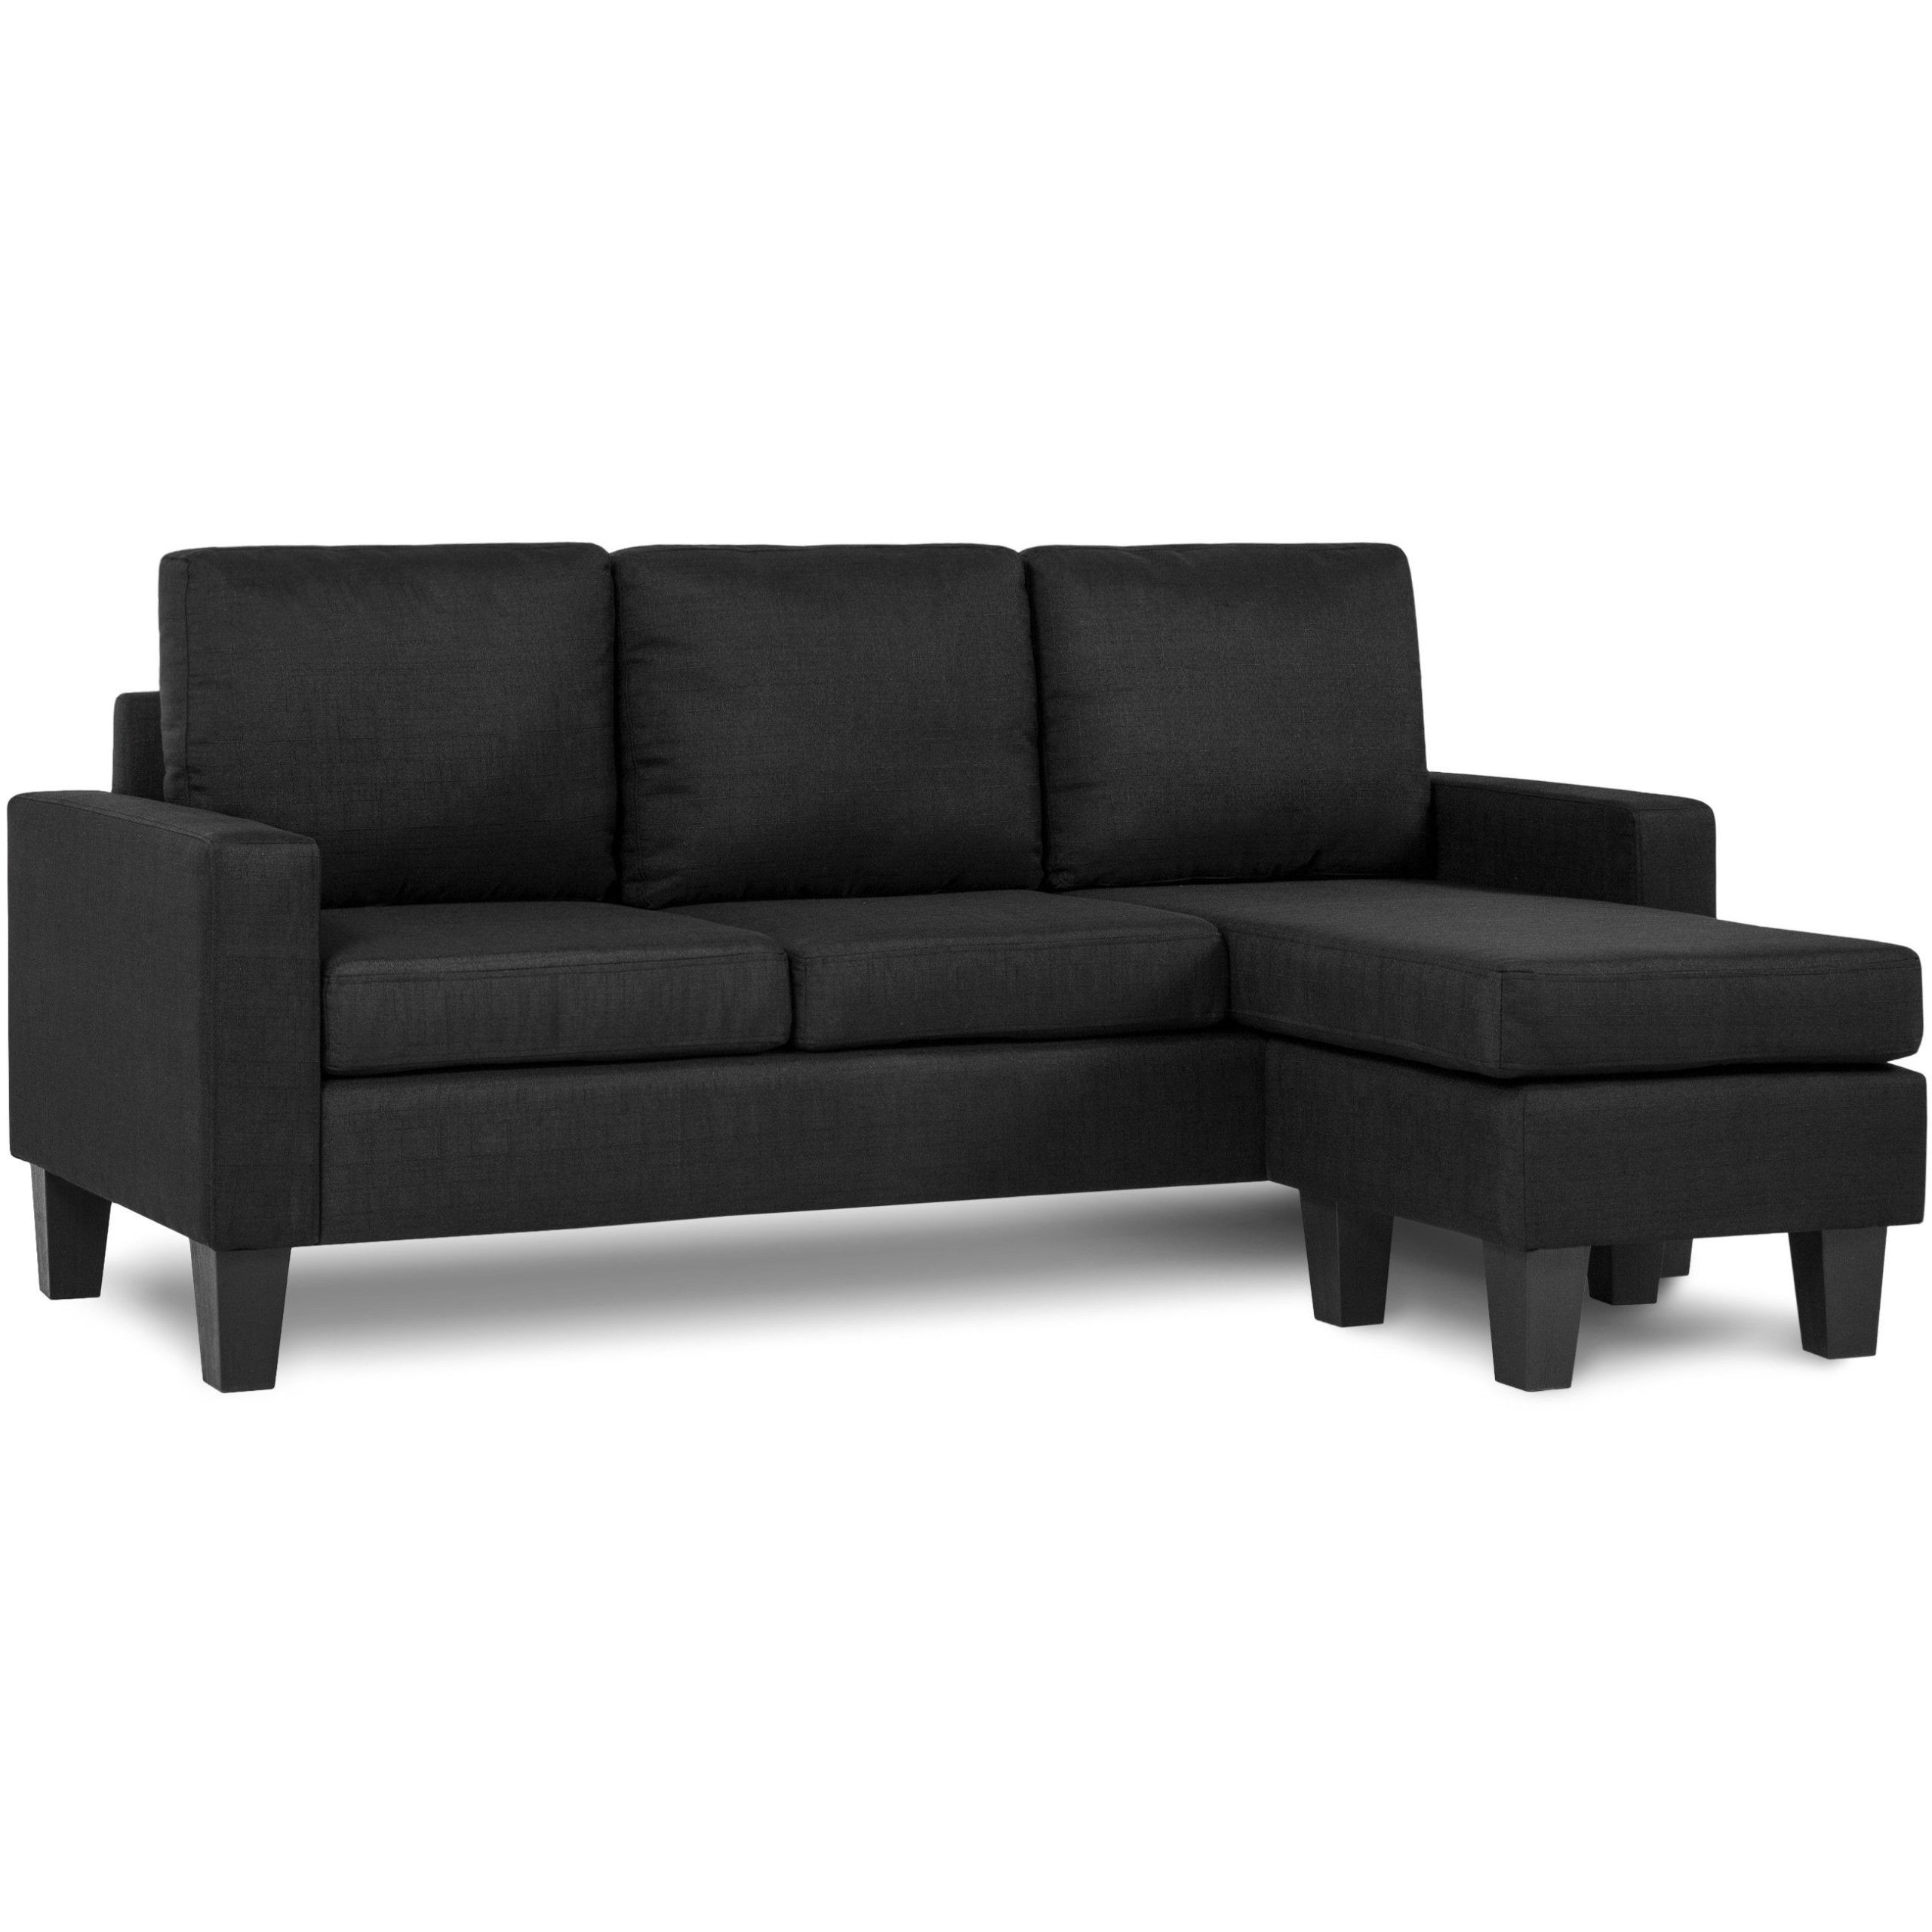 Best Choice Products Multifunctional Linen 3 Seat L Shape Sectional For 3 Seat L Shaped Sofas In Black (Gallery 16 of 20)